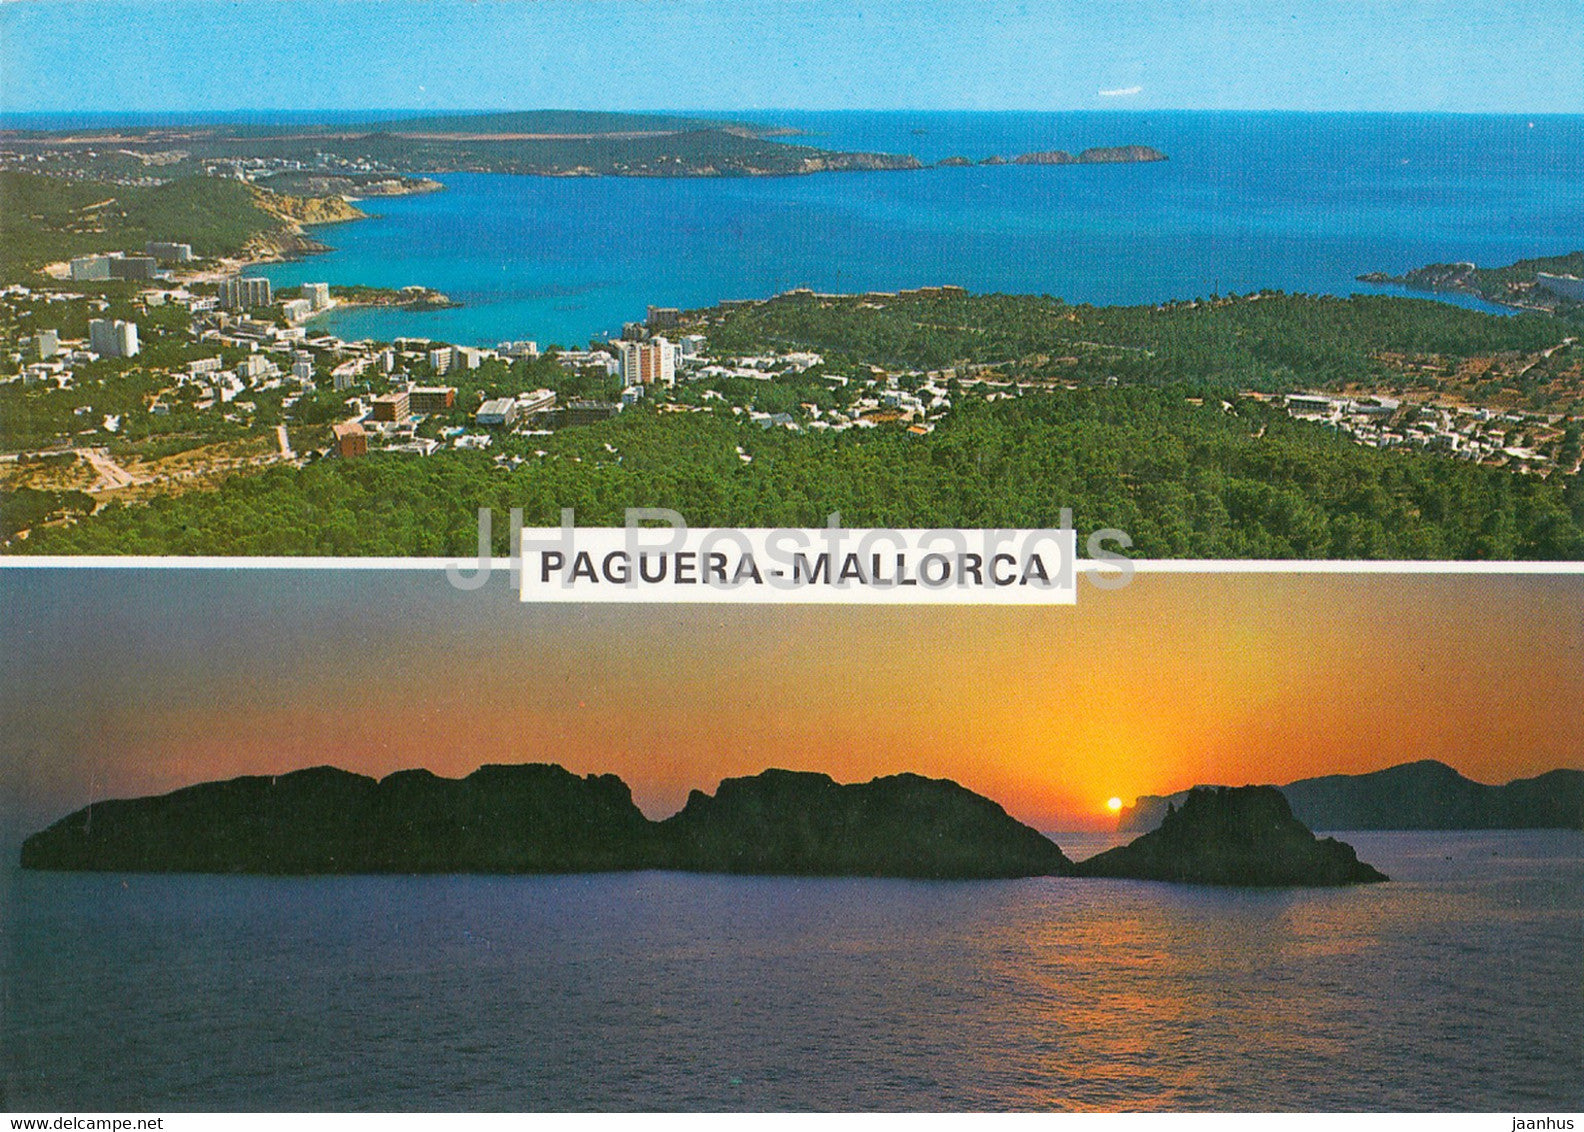 Paguera - Mallorca - aerial view - Spain - unused - JH Postcards